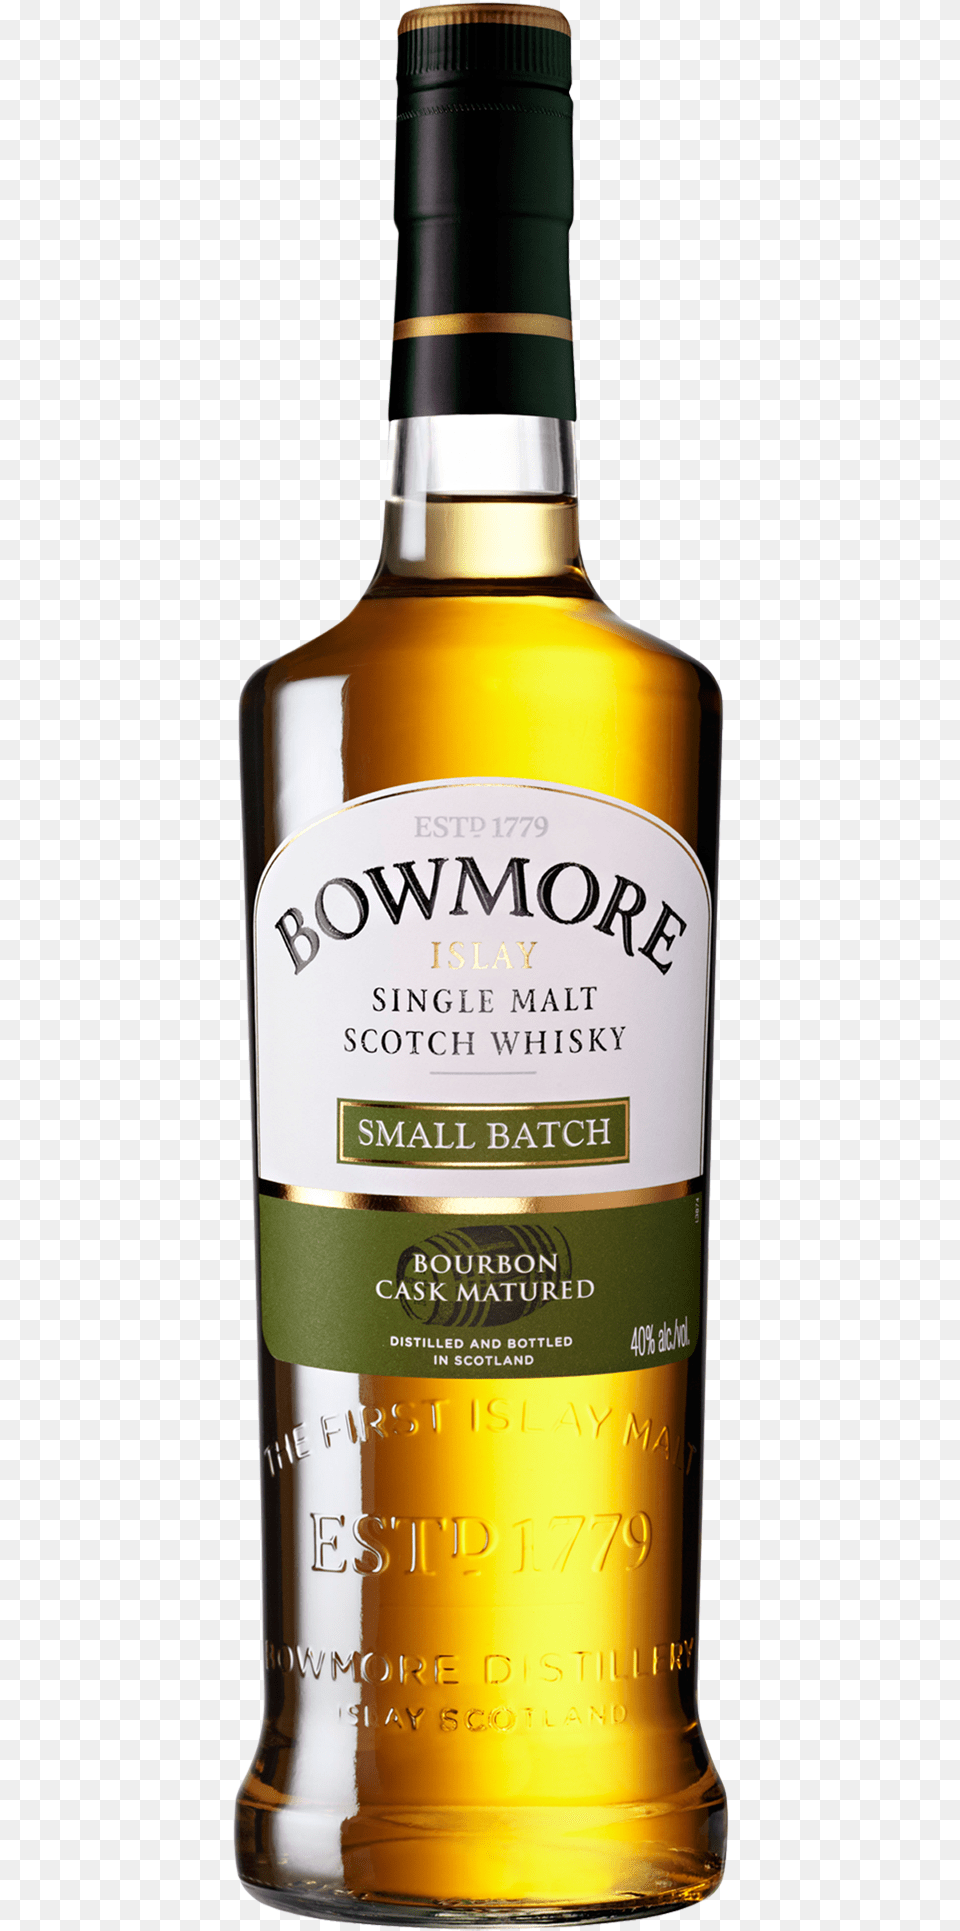 Buy Bowmore Small Batch Scotch Whisky Online Today Bowmore Small Batch Bourbon Cask Matured Single Malt, Alcohol, Beverage, Liquor, Beer Free Png Download